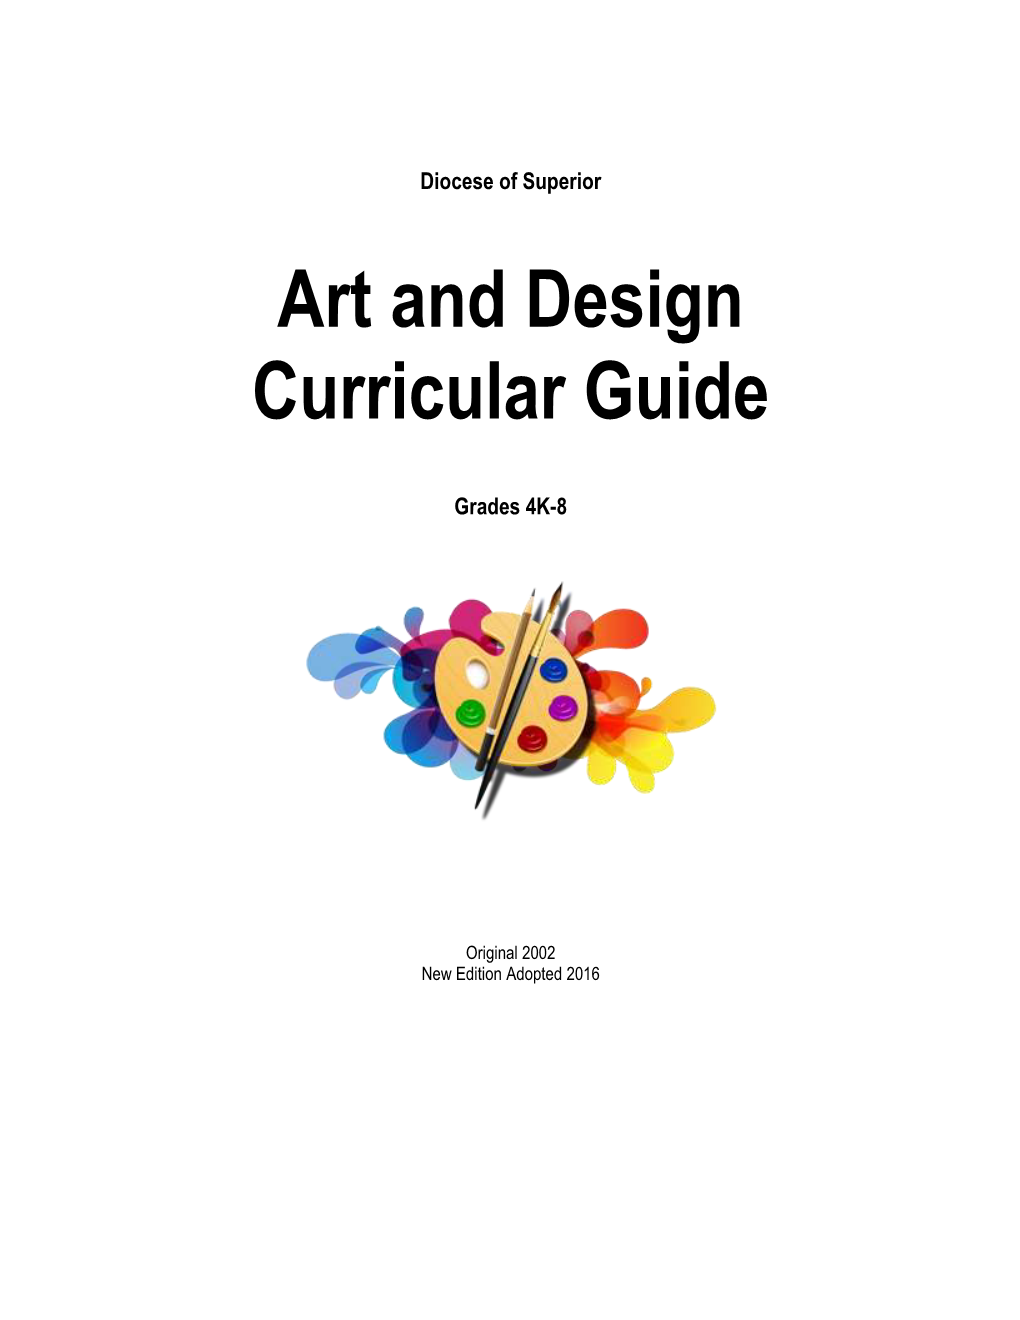 Art and Design Curricular Guide